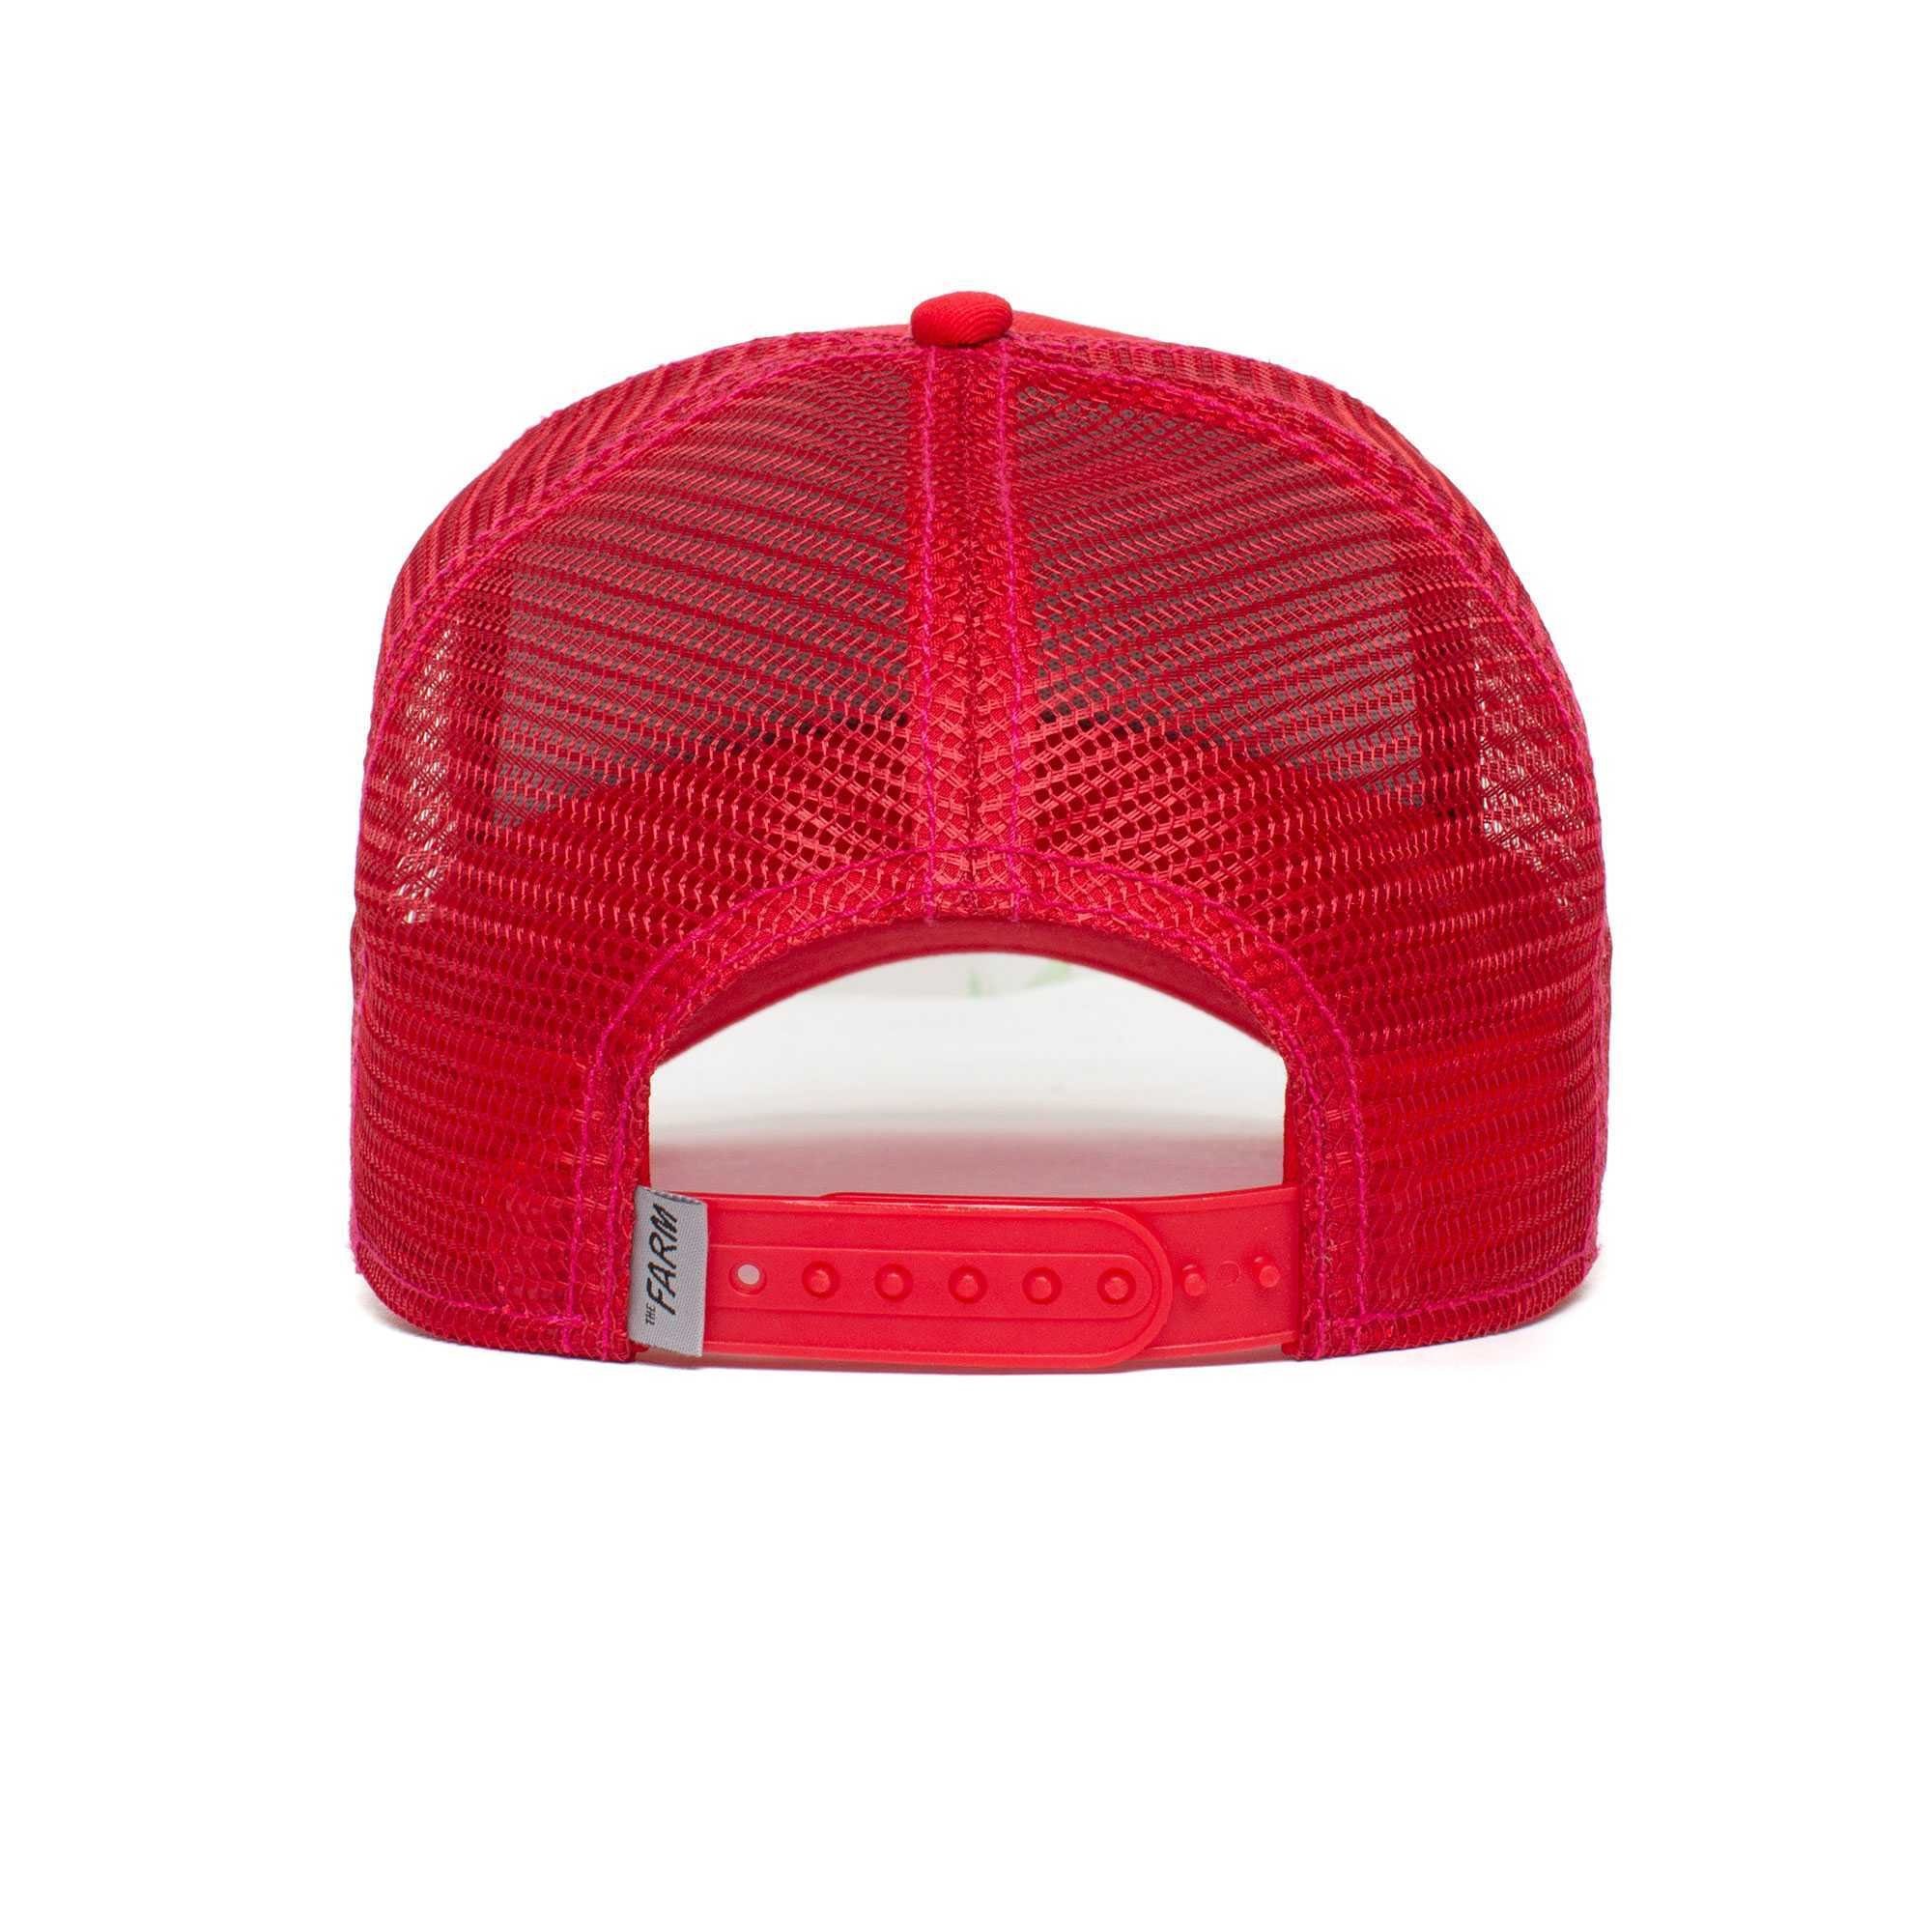 - Bros. Size Trucker Baseball One Frontpatch, Cap red Cap Kappe, The Cock GOORIN Unisex